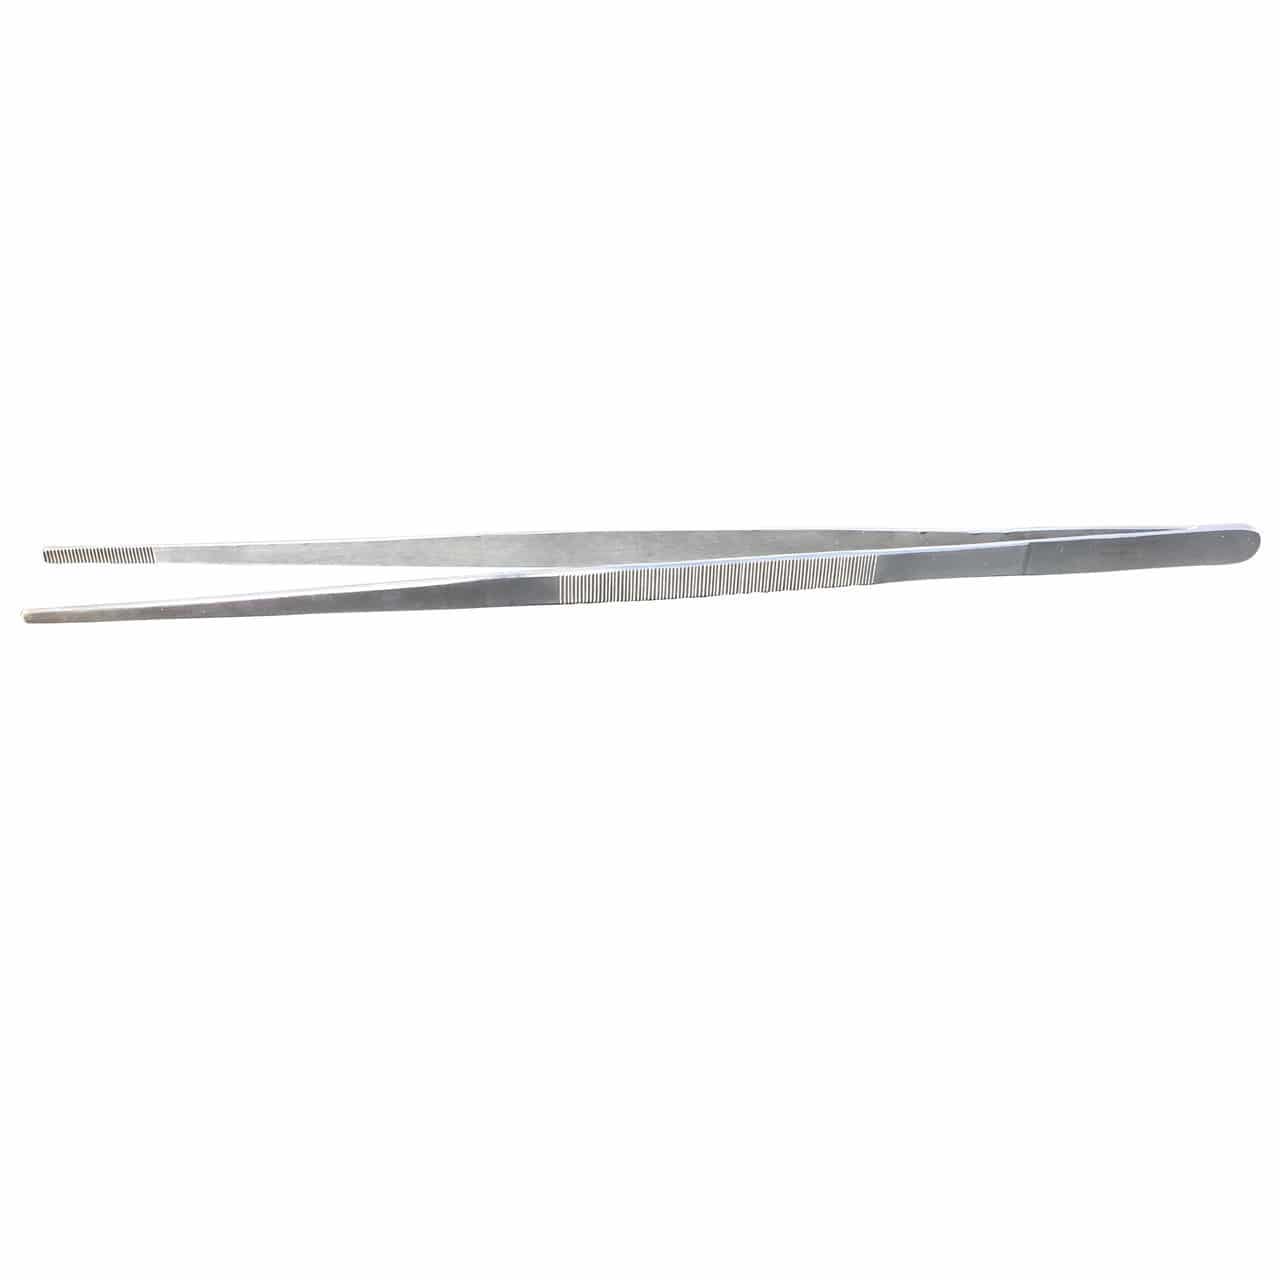 Aquarium Tweezers Extra Long 18 Inches Stainless Steel Straight